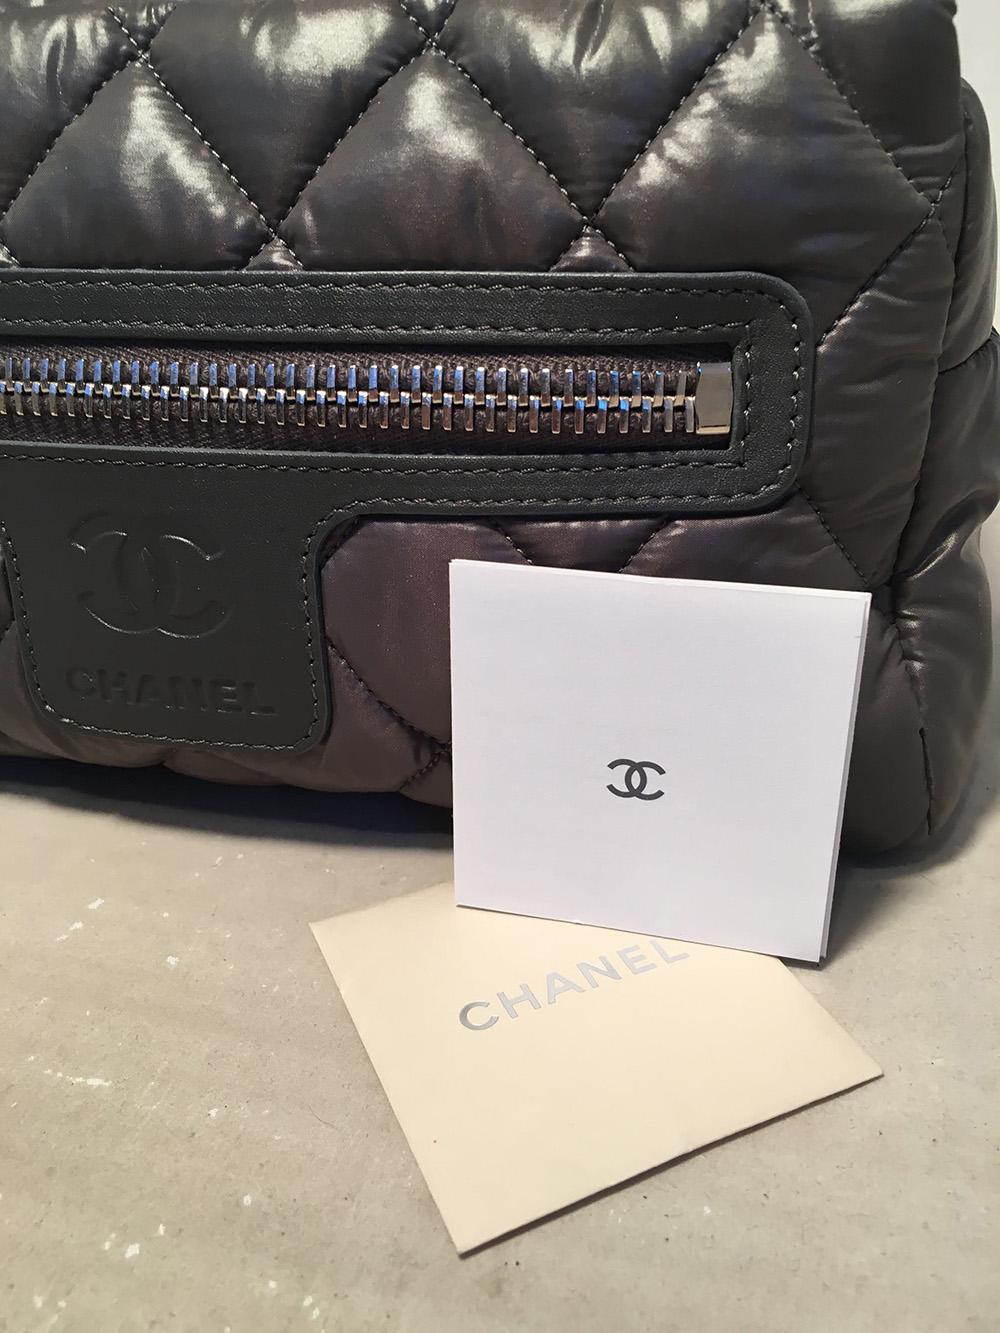 Chanel Grey Puffy Quilted Travel Accessories Cosmetic Pouch en vente 4